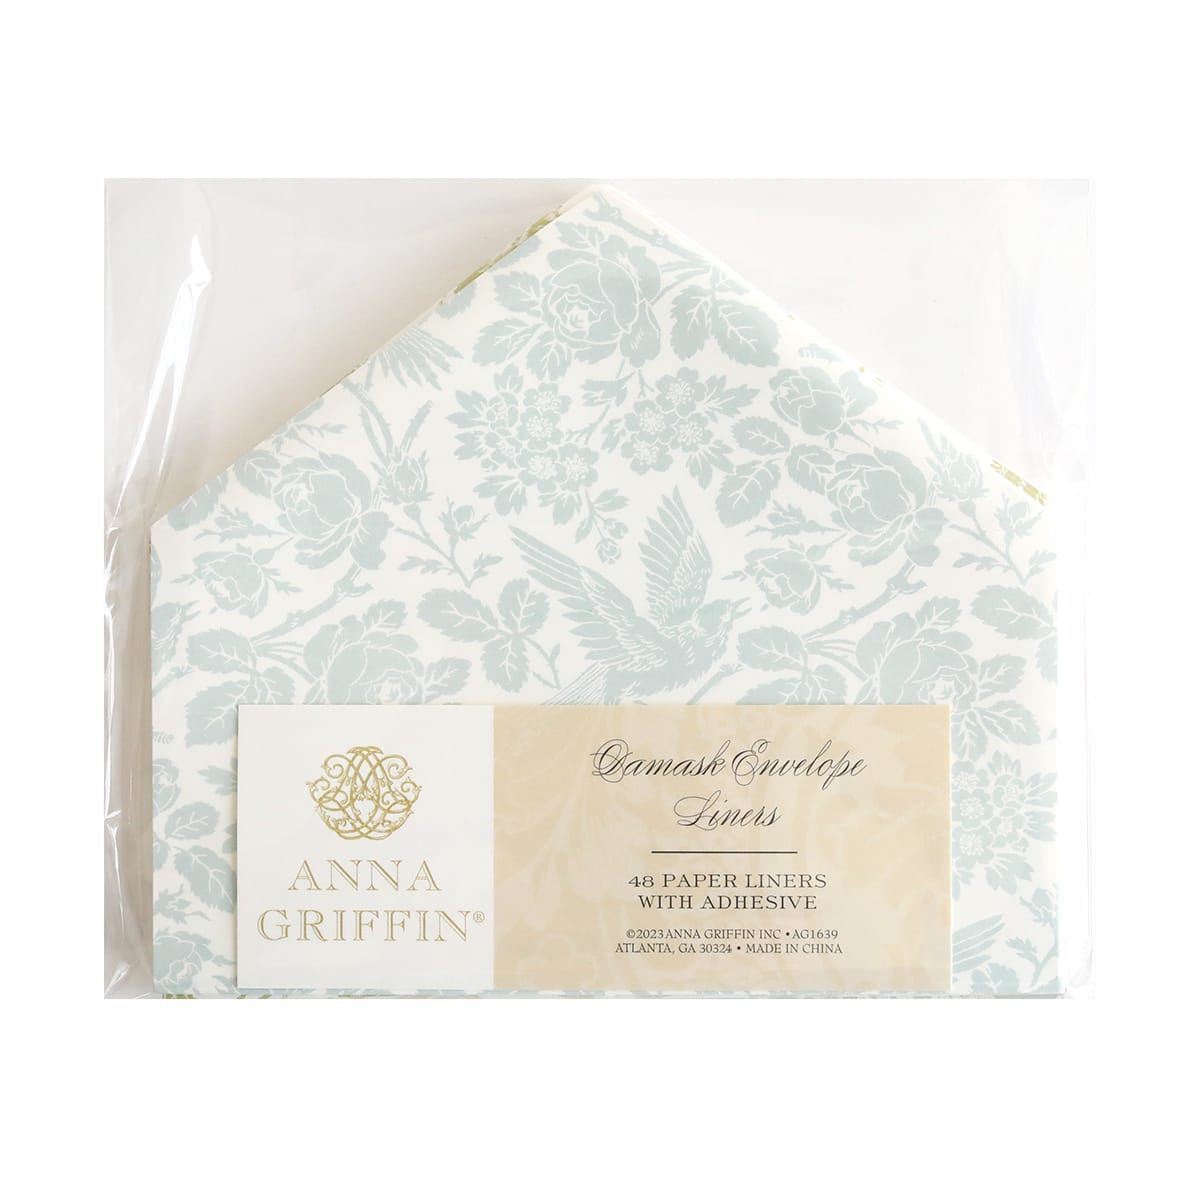 Anna Griffin Damask 5 x 7 Envelope Liners Set of 48